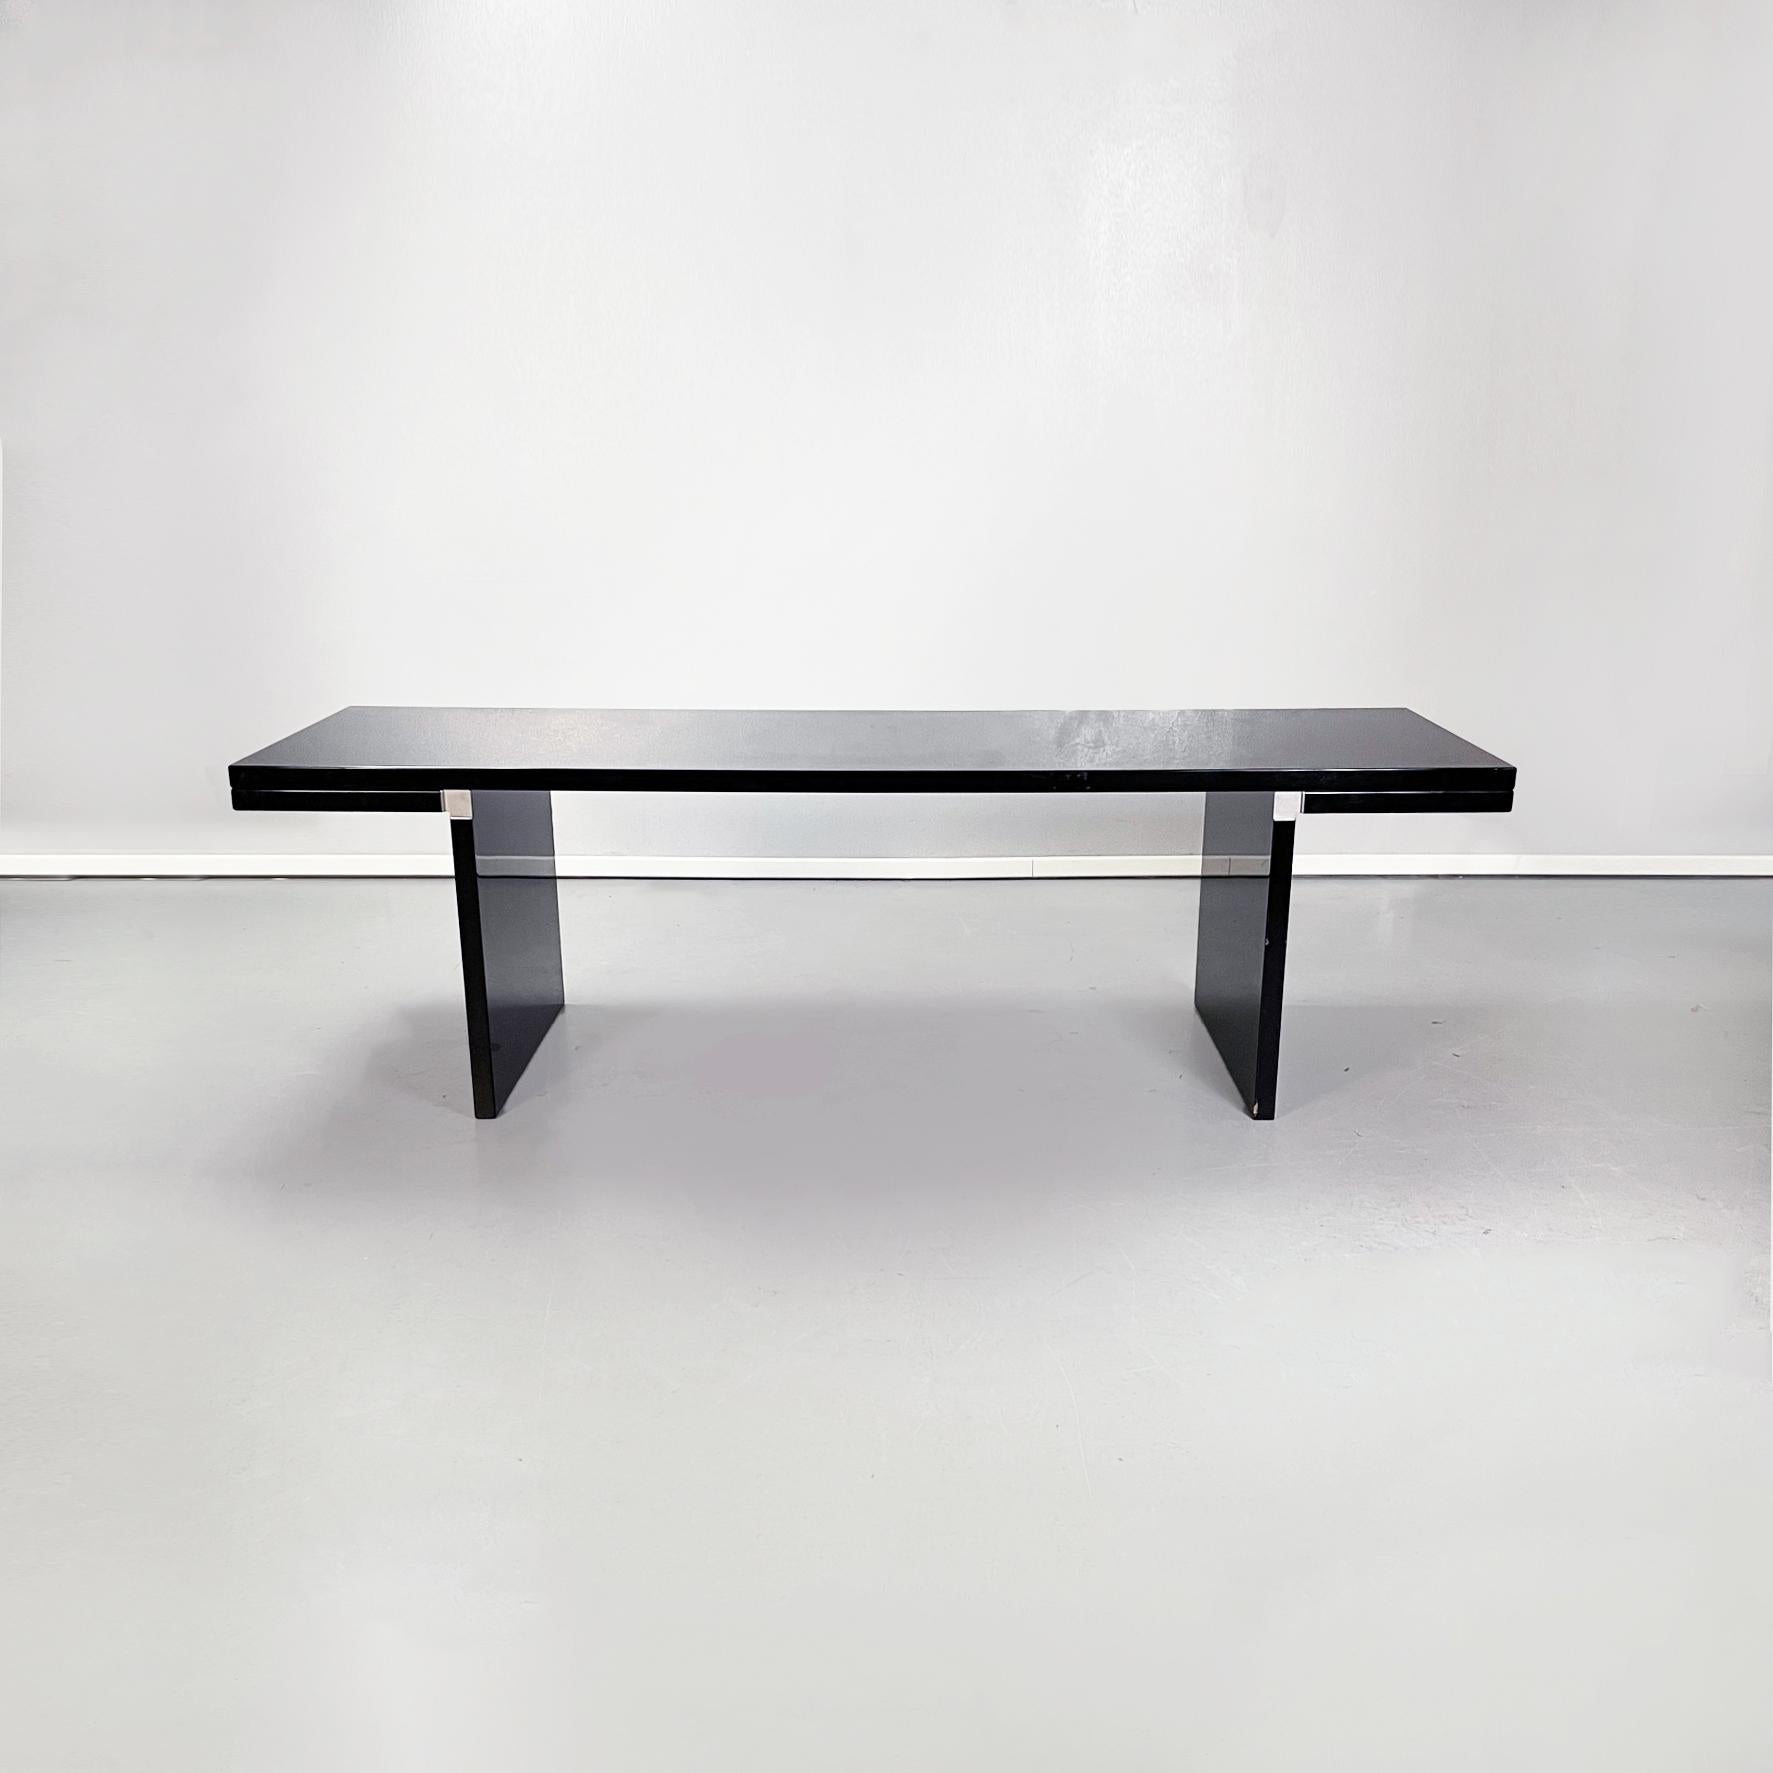 Italian mid-century black wood Orseolo dining table by Scarpa for Gavina, 1970s
Orseolo dining table with rectangular piano in black lacquered wood, like the entire structure. The structure is made by assembling geometric panels elements, in